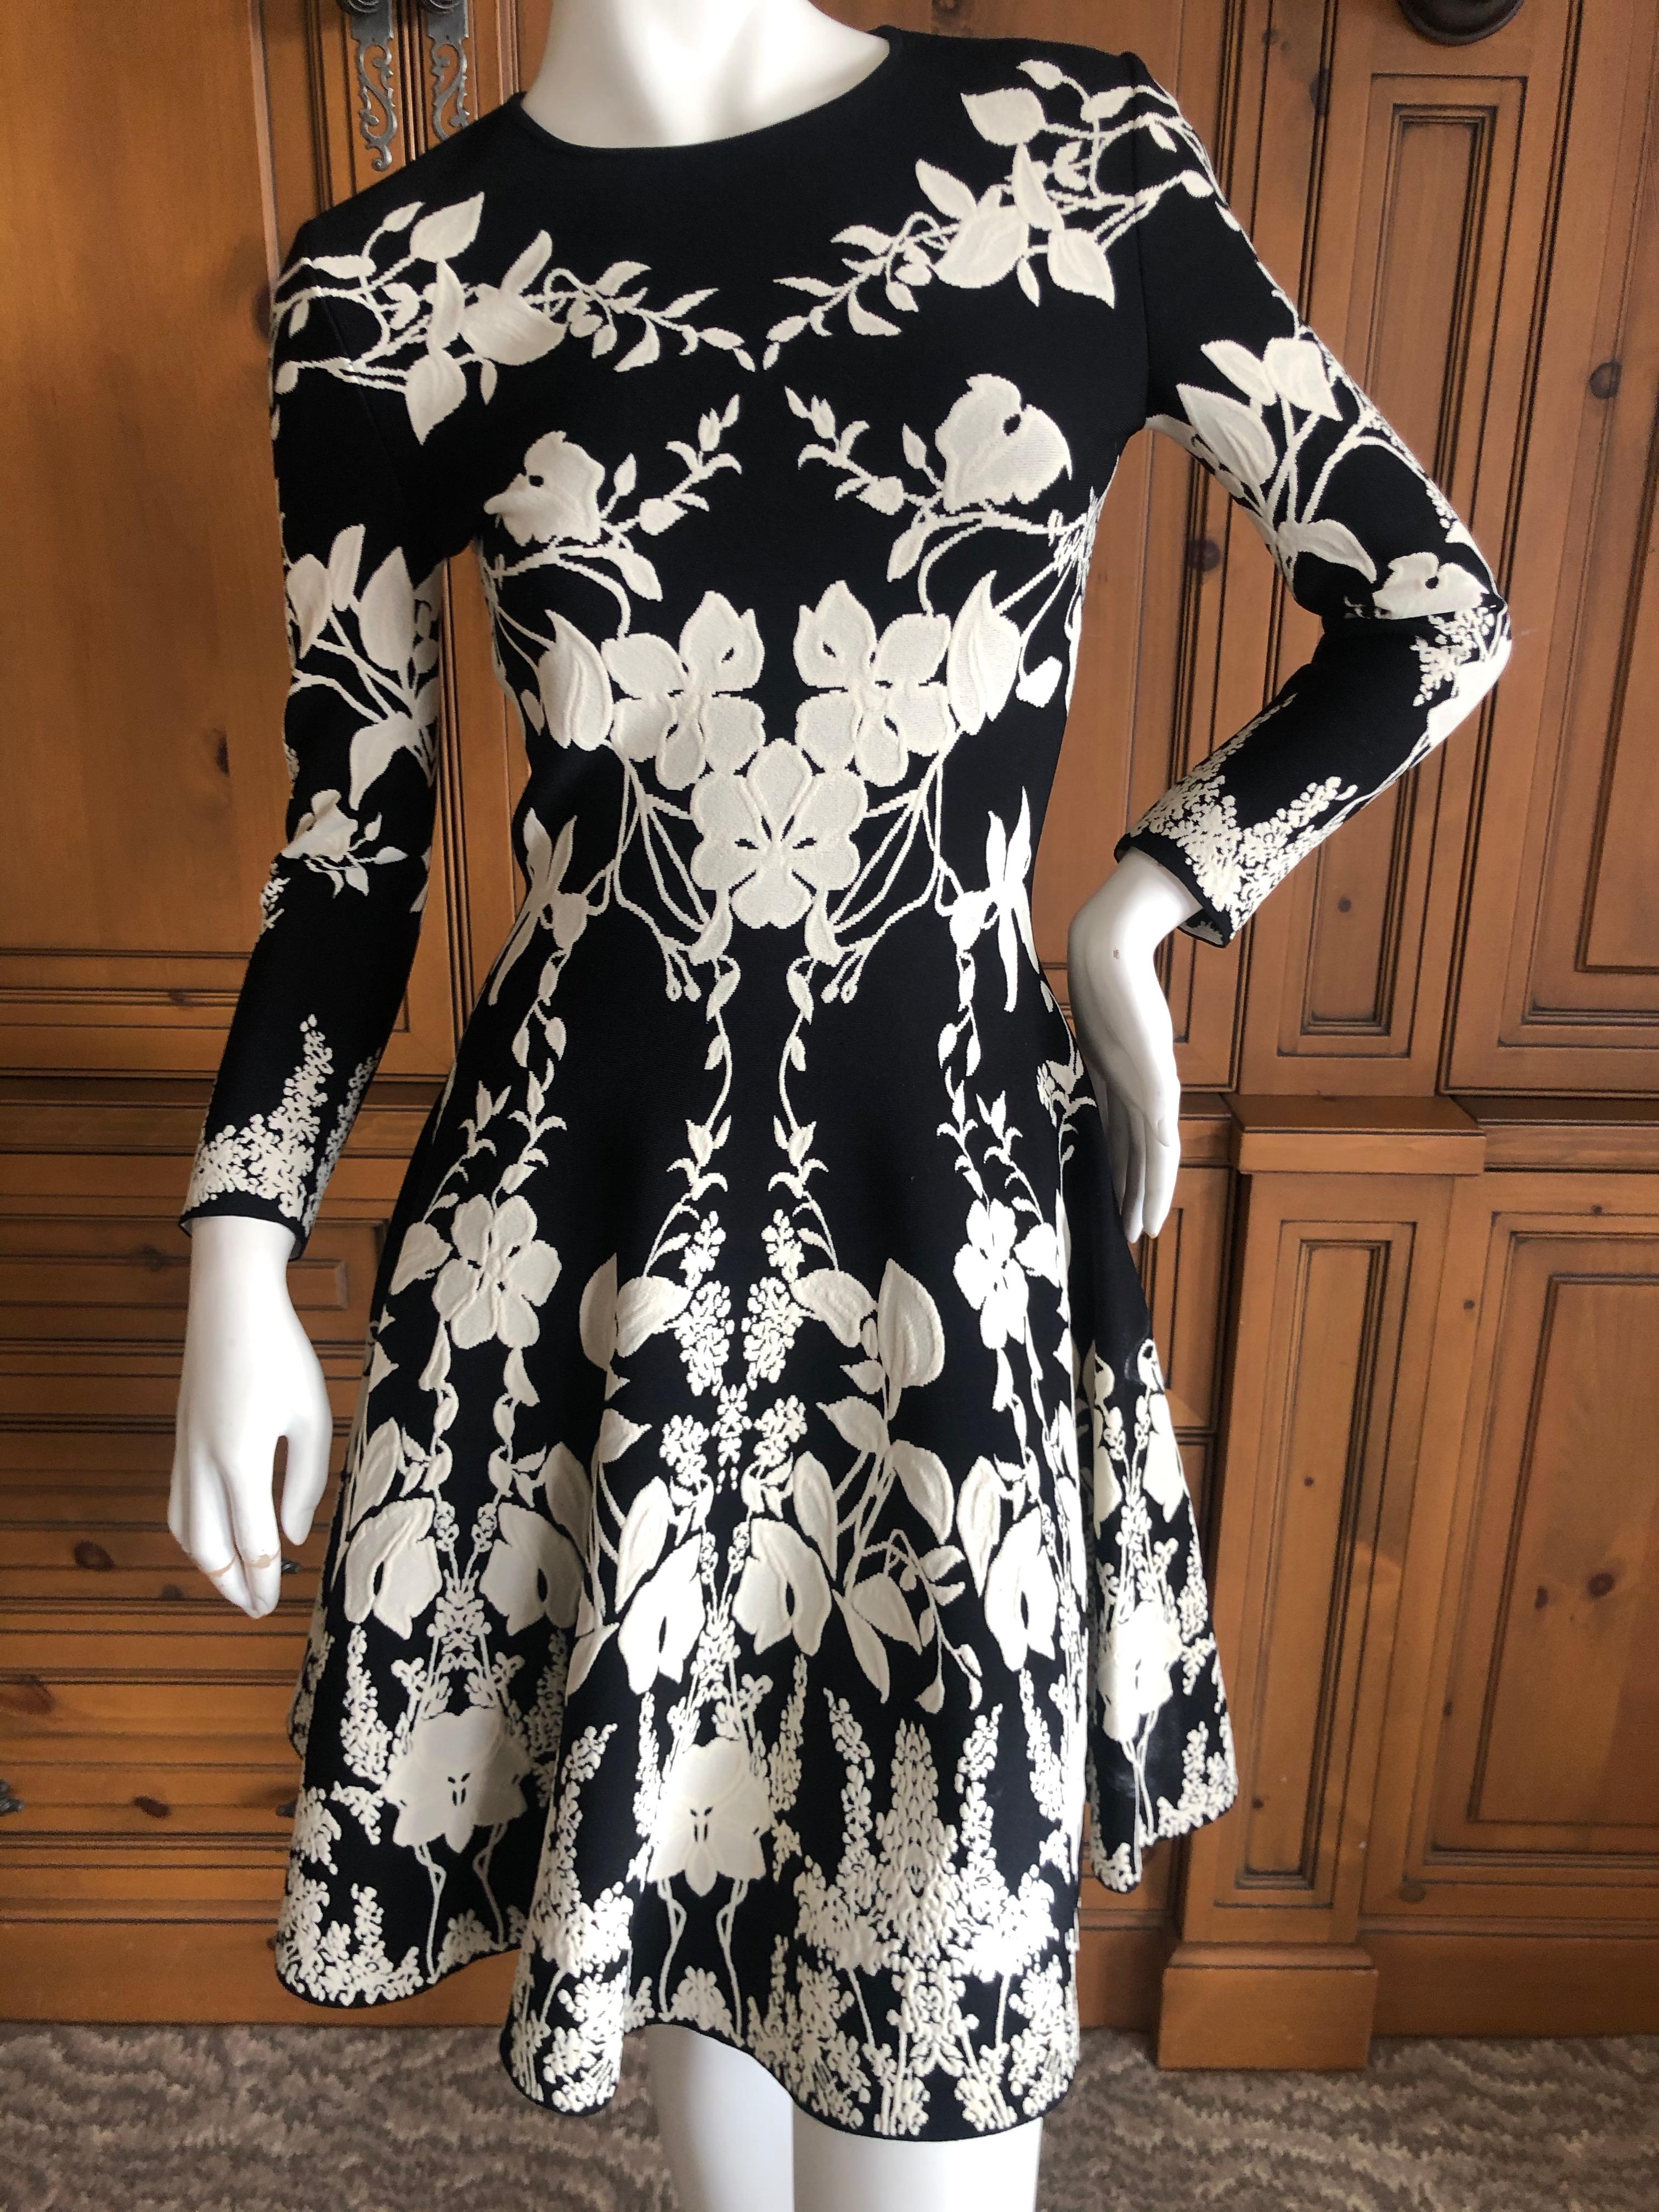 Alexander McQueen Black and White Inartsia Floral Knit Dress with Skater Skirt.
2017
So pretty, please use the zoom feature to see the details
Size XS , there is a lot of stretch
  Bust 34